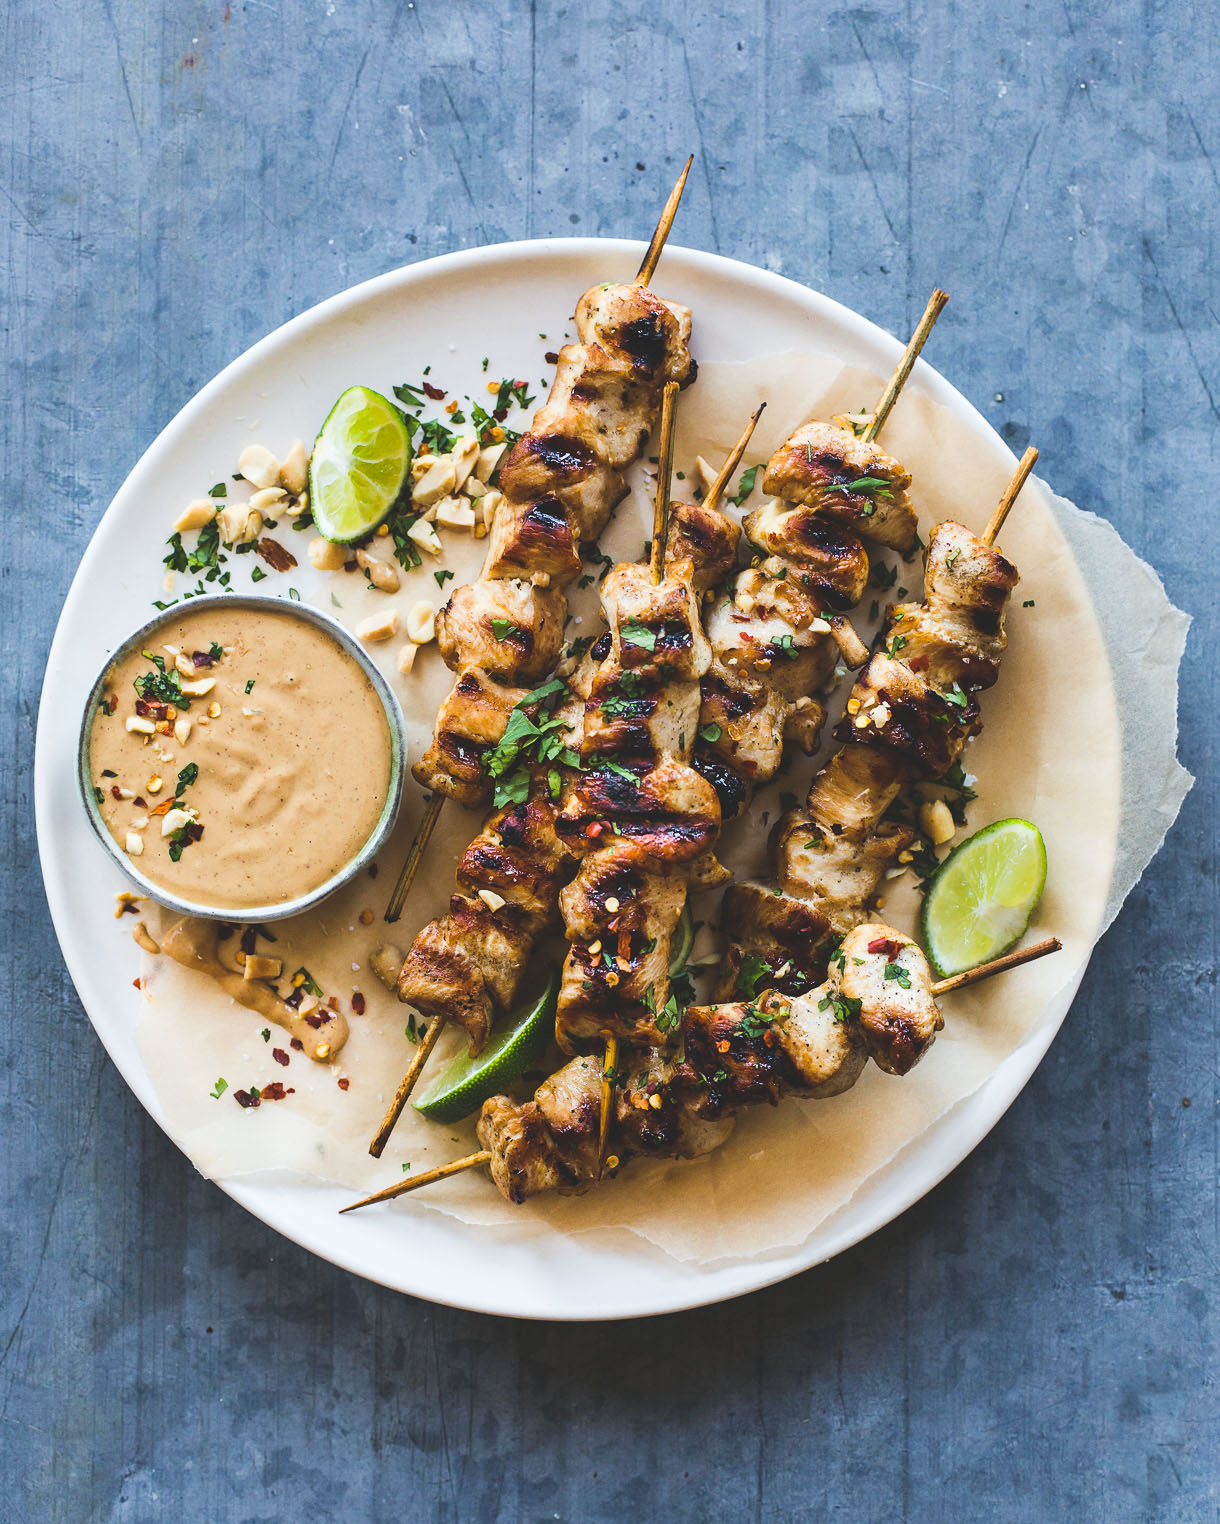 Sizzlin' Thai Chicken Skewers with Peanut Sauce from heartbeetkitchen.com on foodiecrush.com